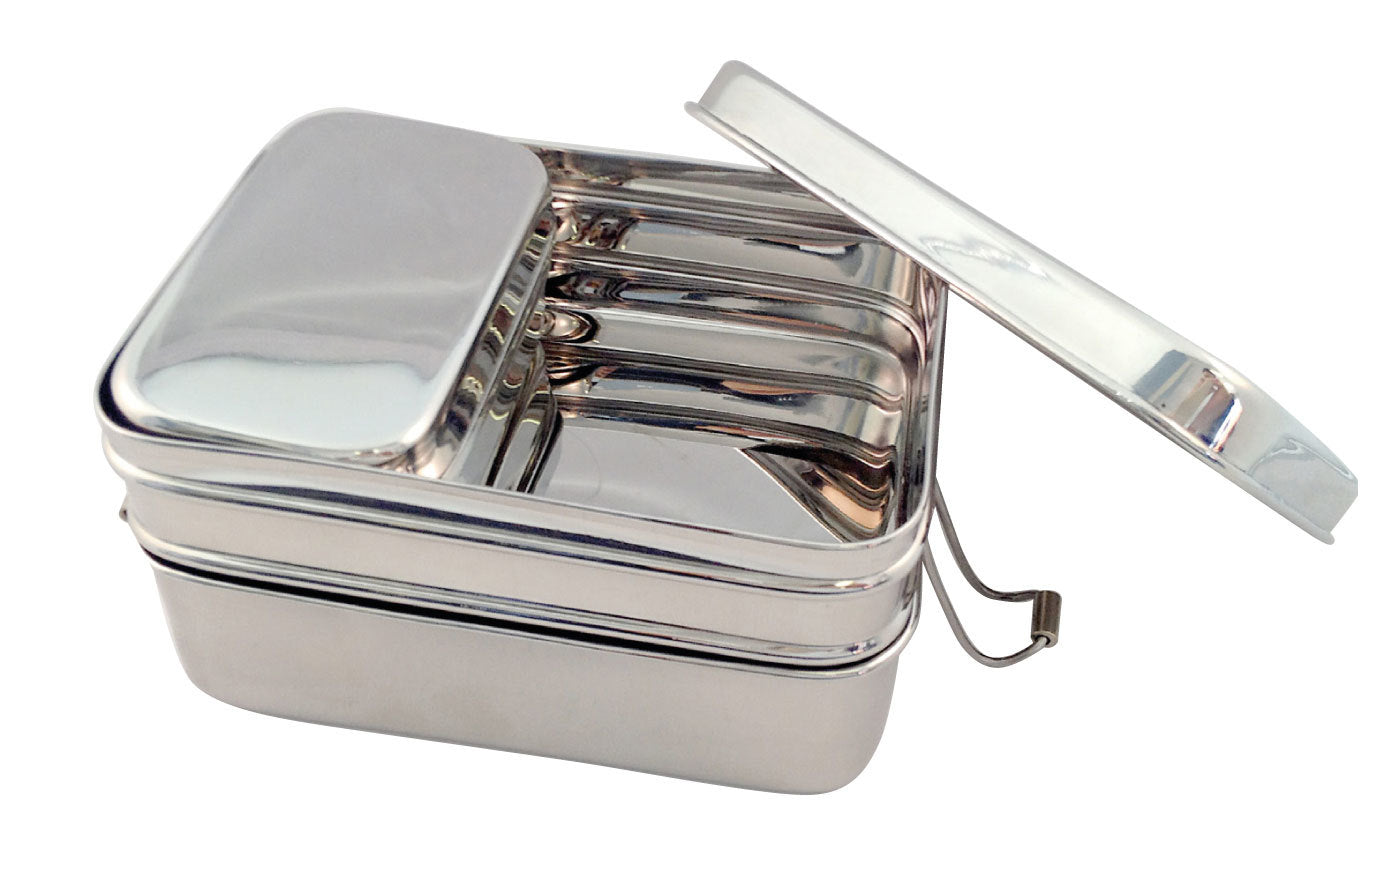 Stainless Steel Tuck-A-Stacker Lunch Box